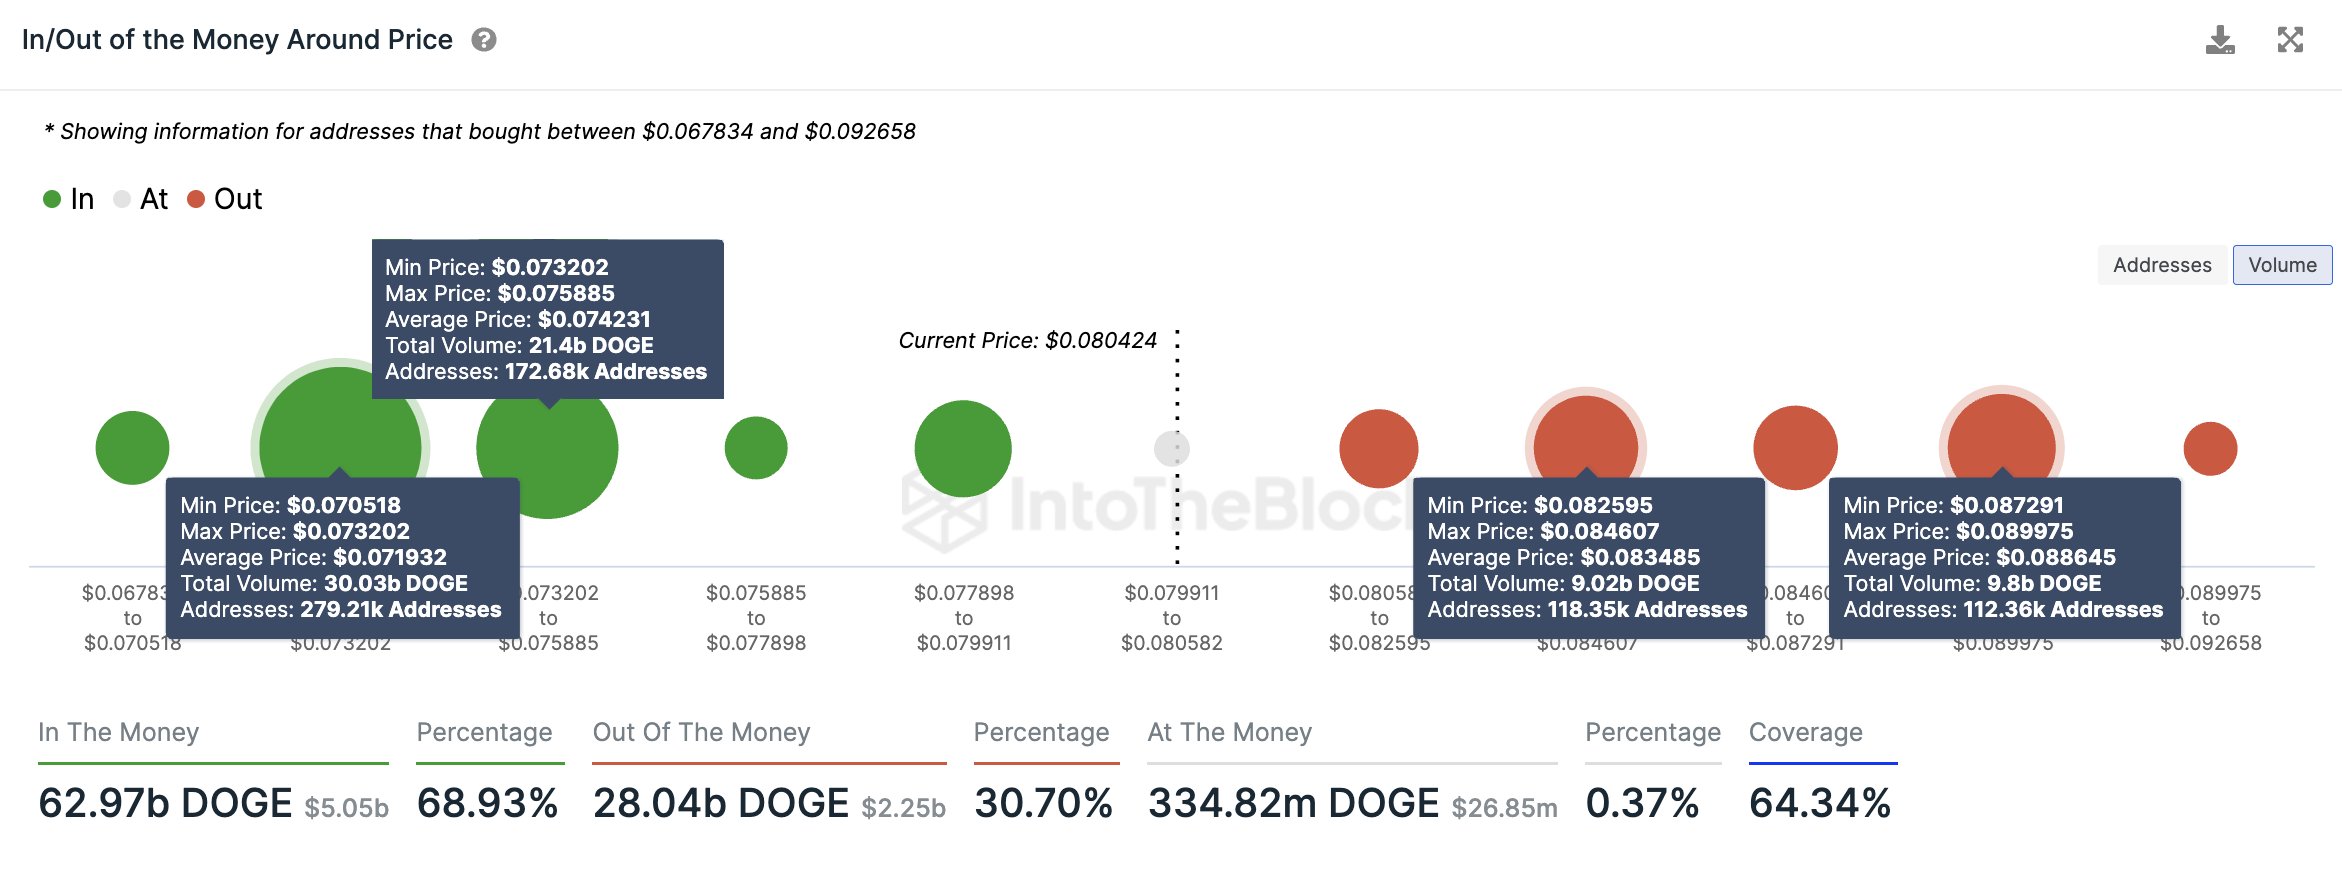 Dogecoin Price Analysis: Whats Next For DOGE?